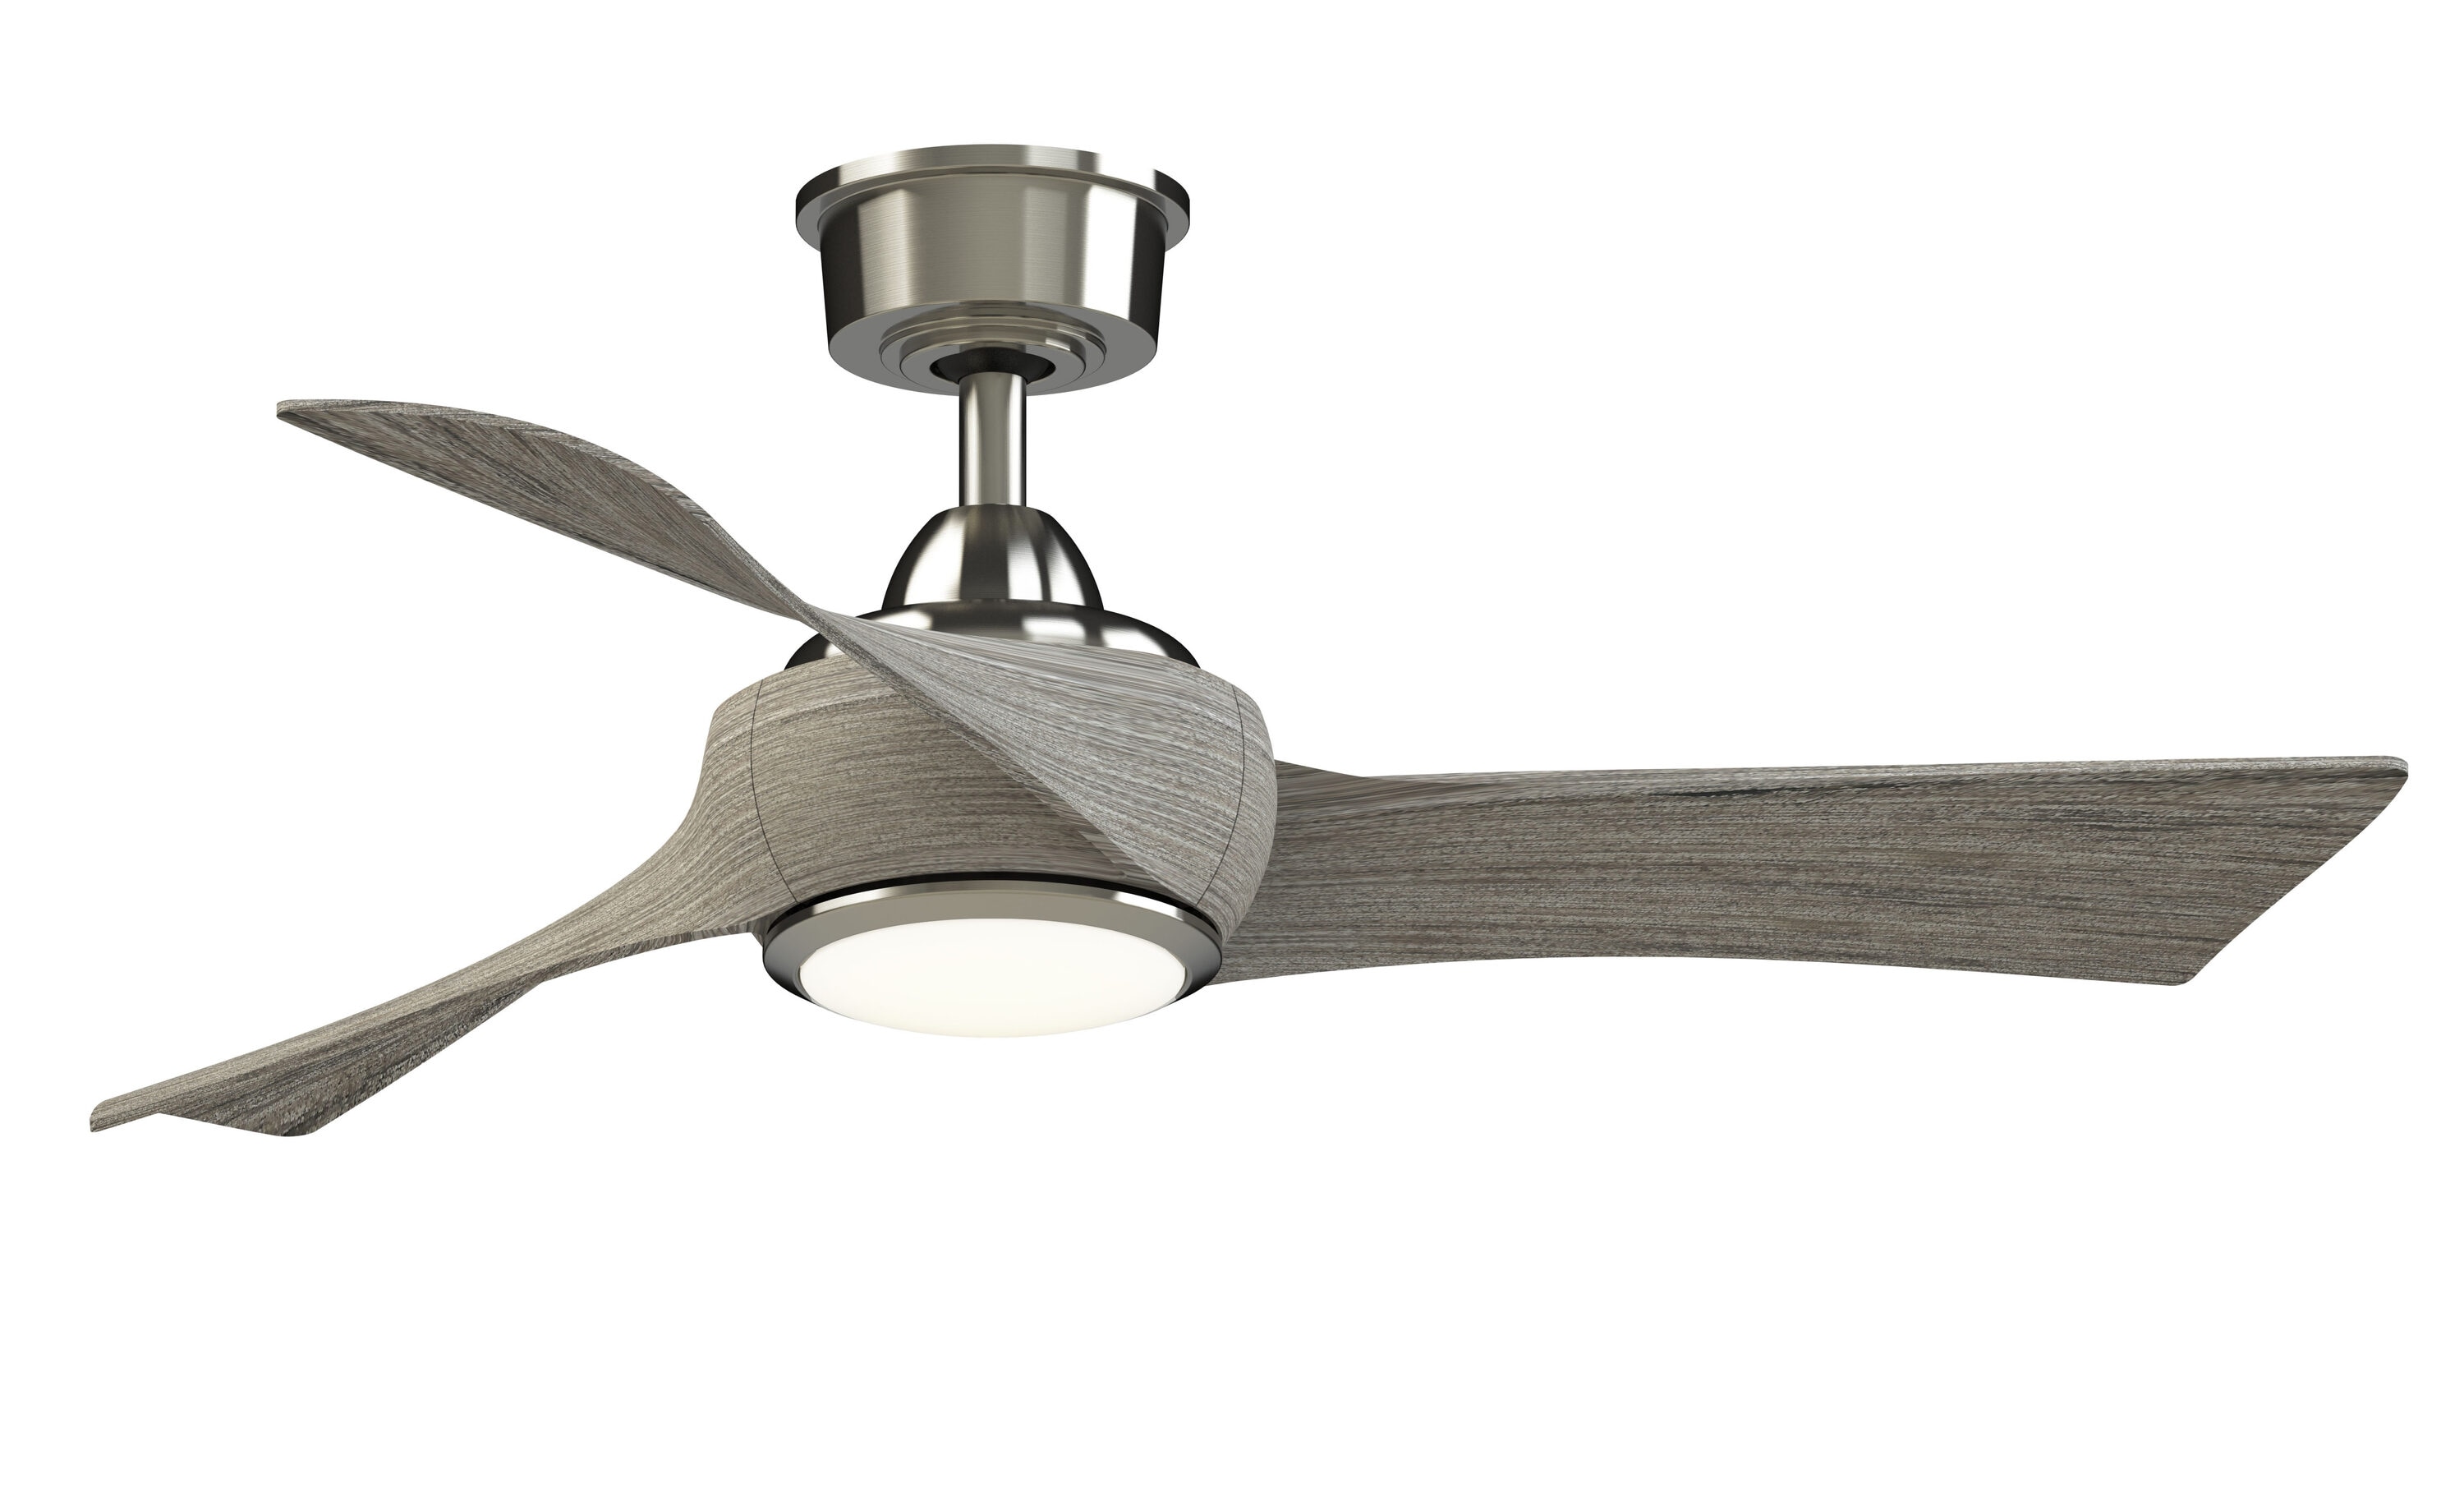 Wrap Custom 44-in Brushed Nickel Color-changing LED Indoor/Outdoor Smart Ceiling Fan with Light Remote (3-Blade) | - Fanimation FPD8530BN-44WE-LK